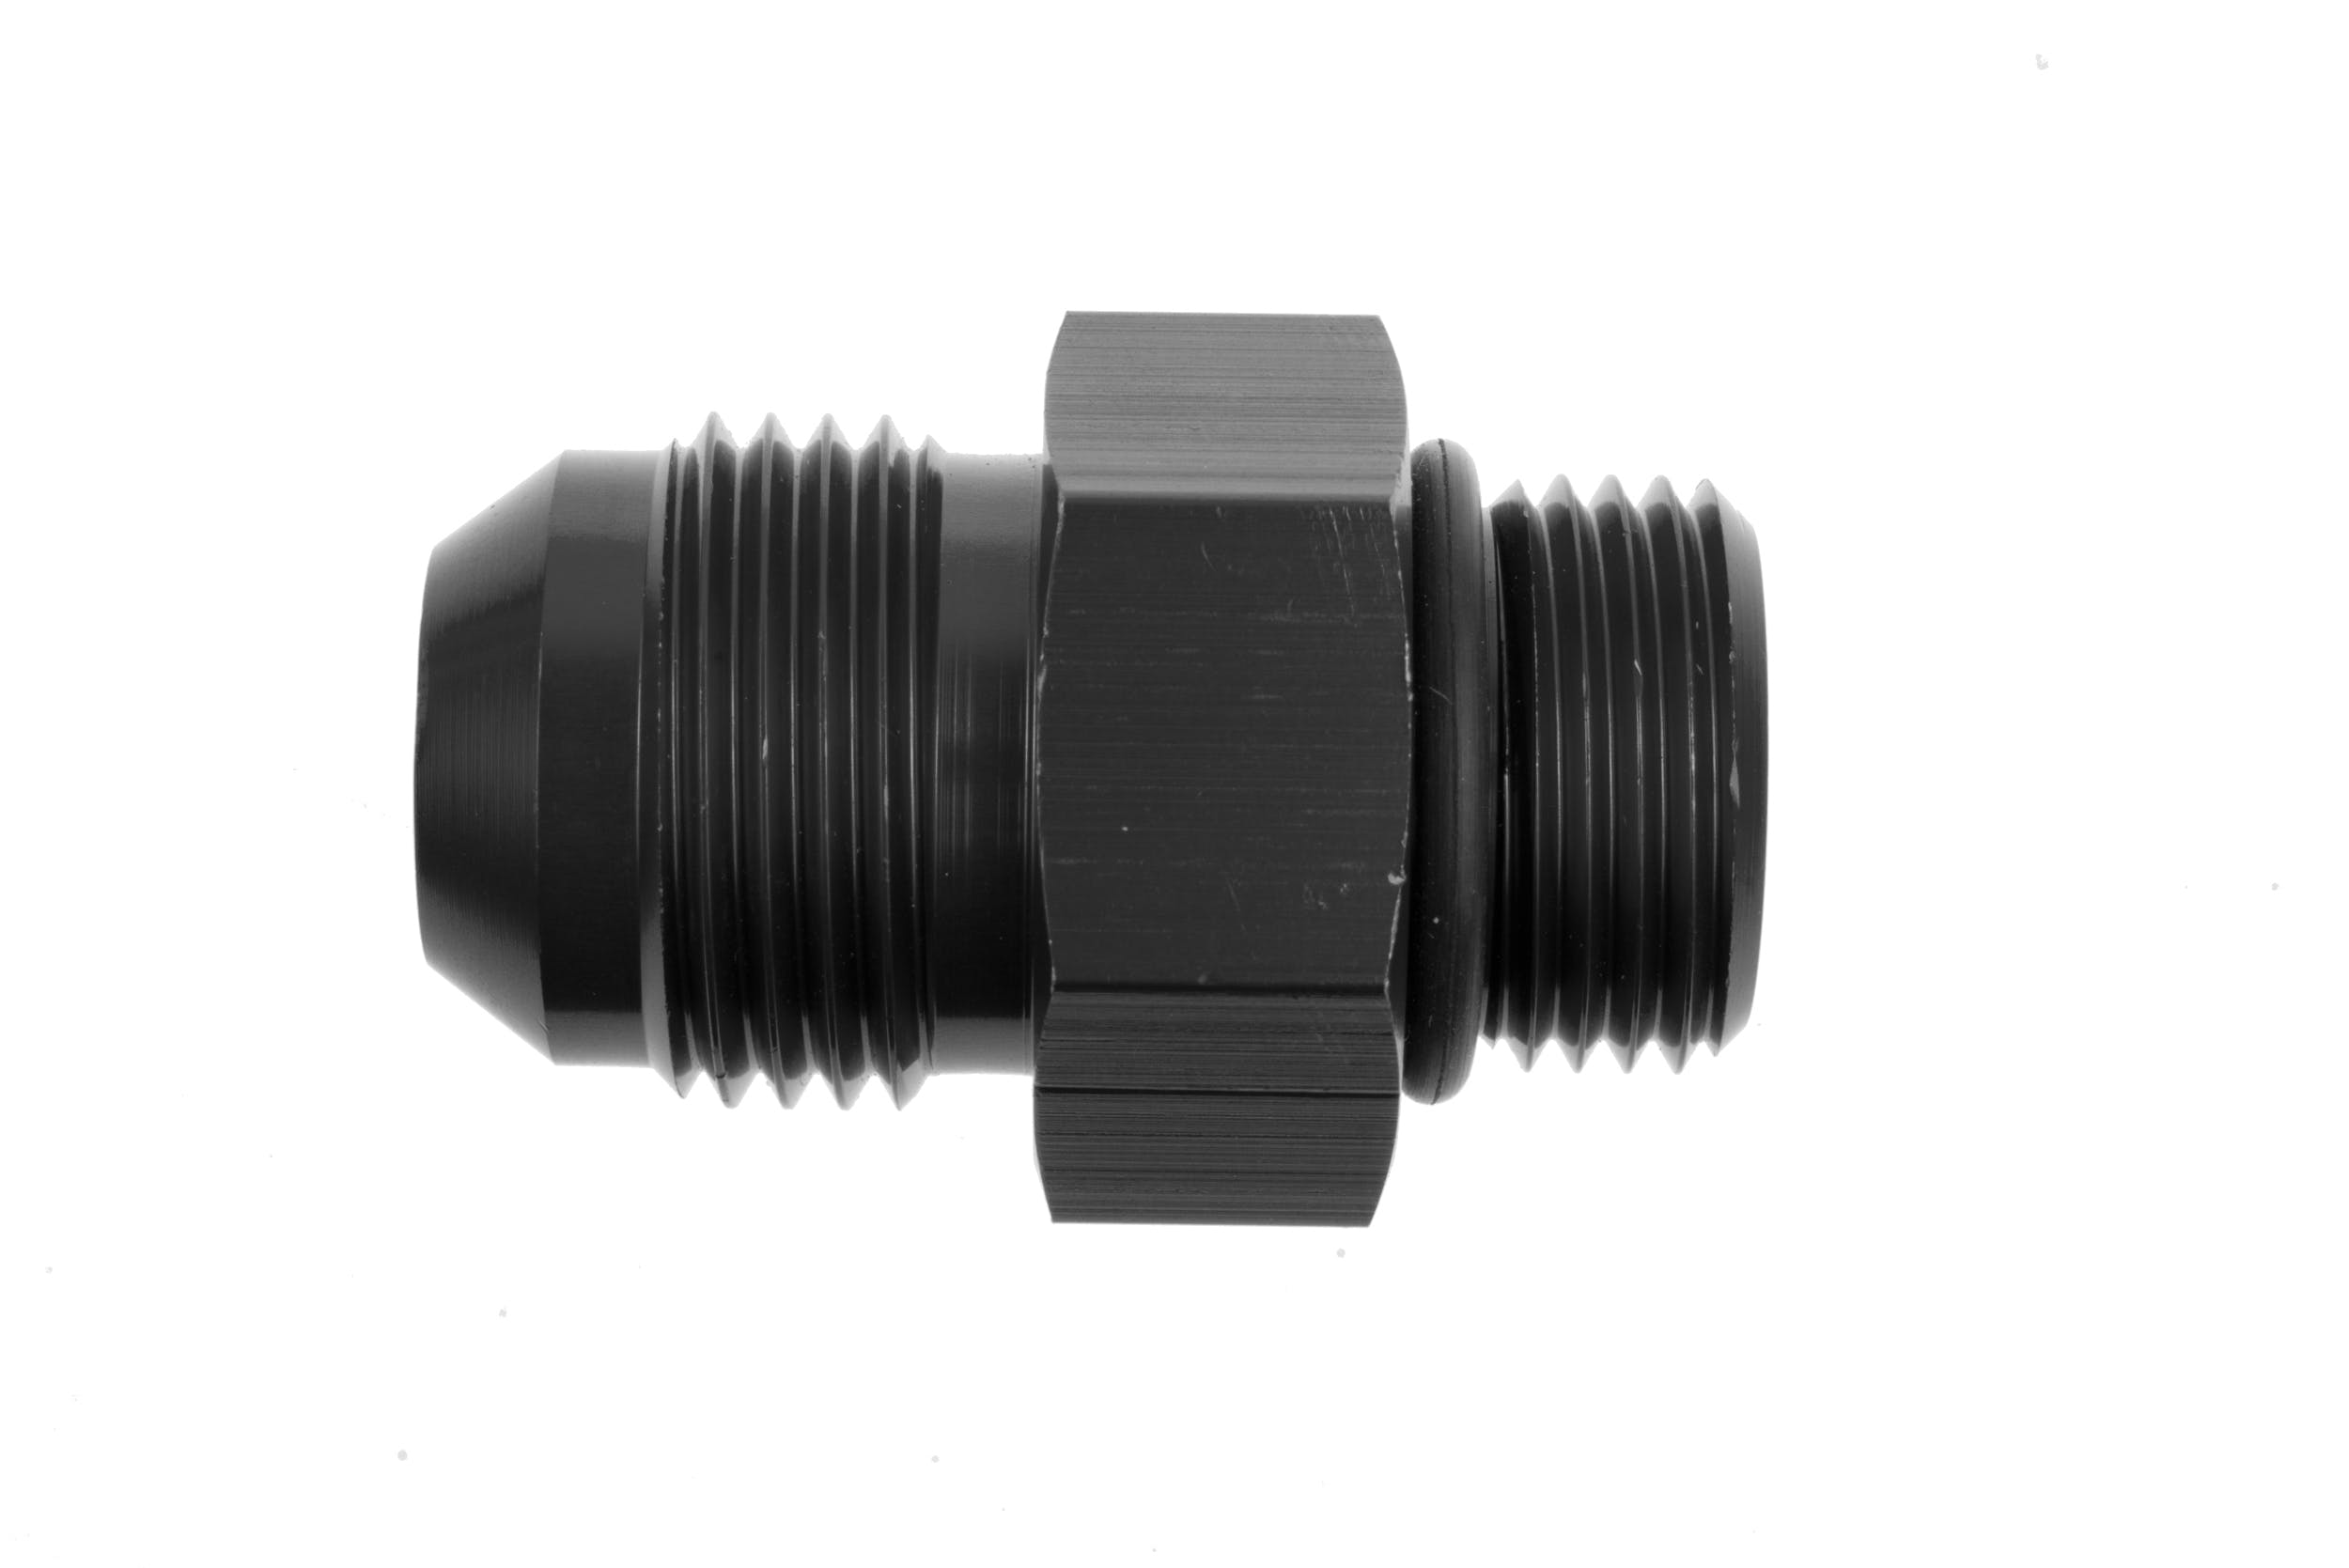 Redhorse Performance 920-12-10-2 -12 Male to -10 o-ring port adapter (high flow radius ORB) - black